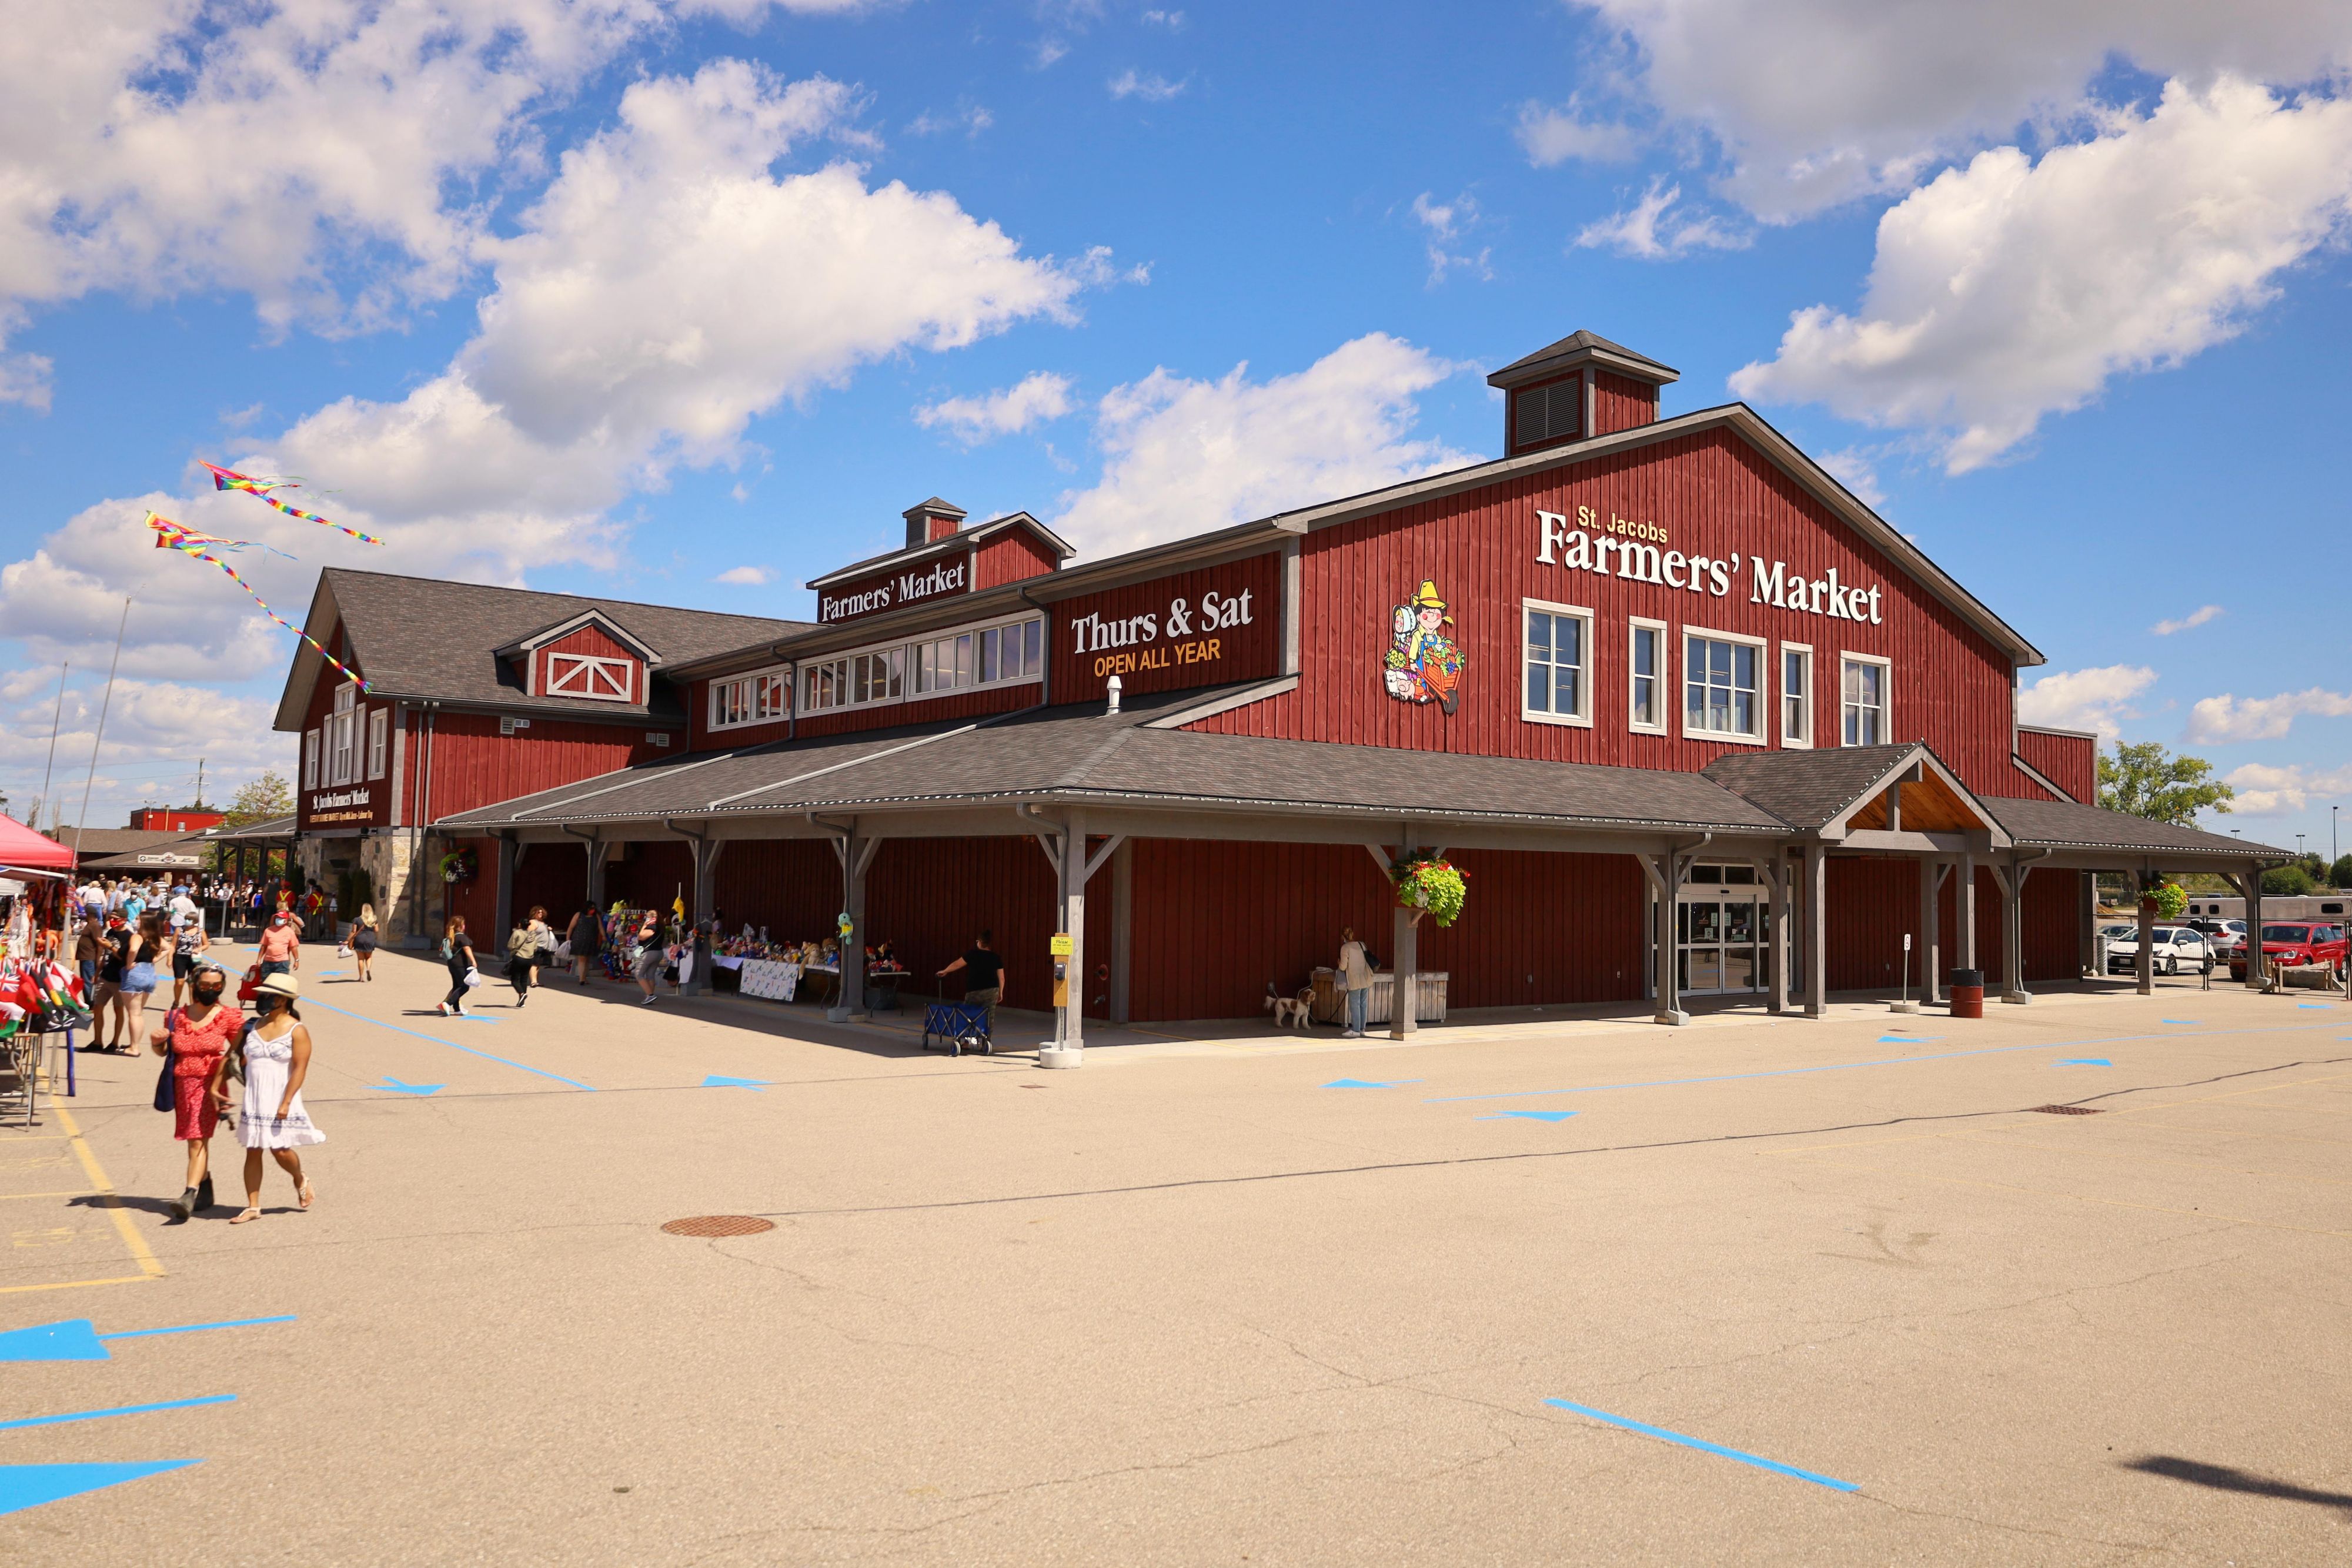 There's so much to do in the Waterloo/St. Jacobs area. Home to Canada's Largest Outdoor Year-Round Farmer's Market. See a show at St. Jacobs Country Playhouse Theatre, Great Local Shoppes, Dining, Hiking Trails and much more!